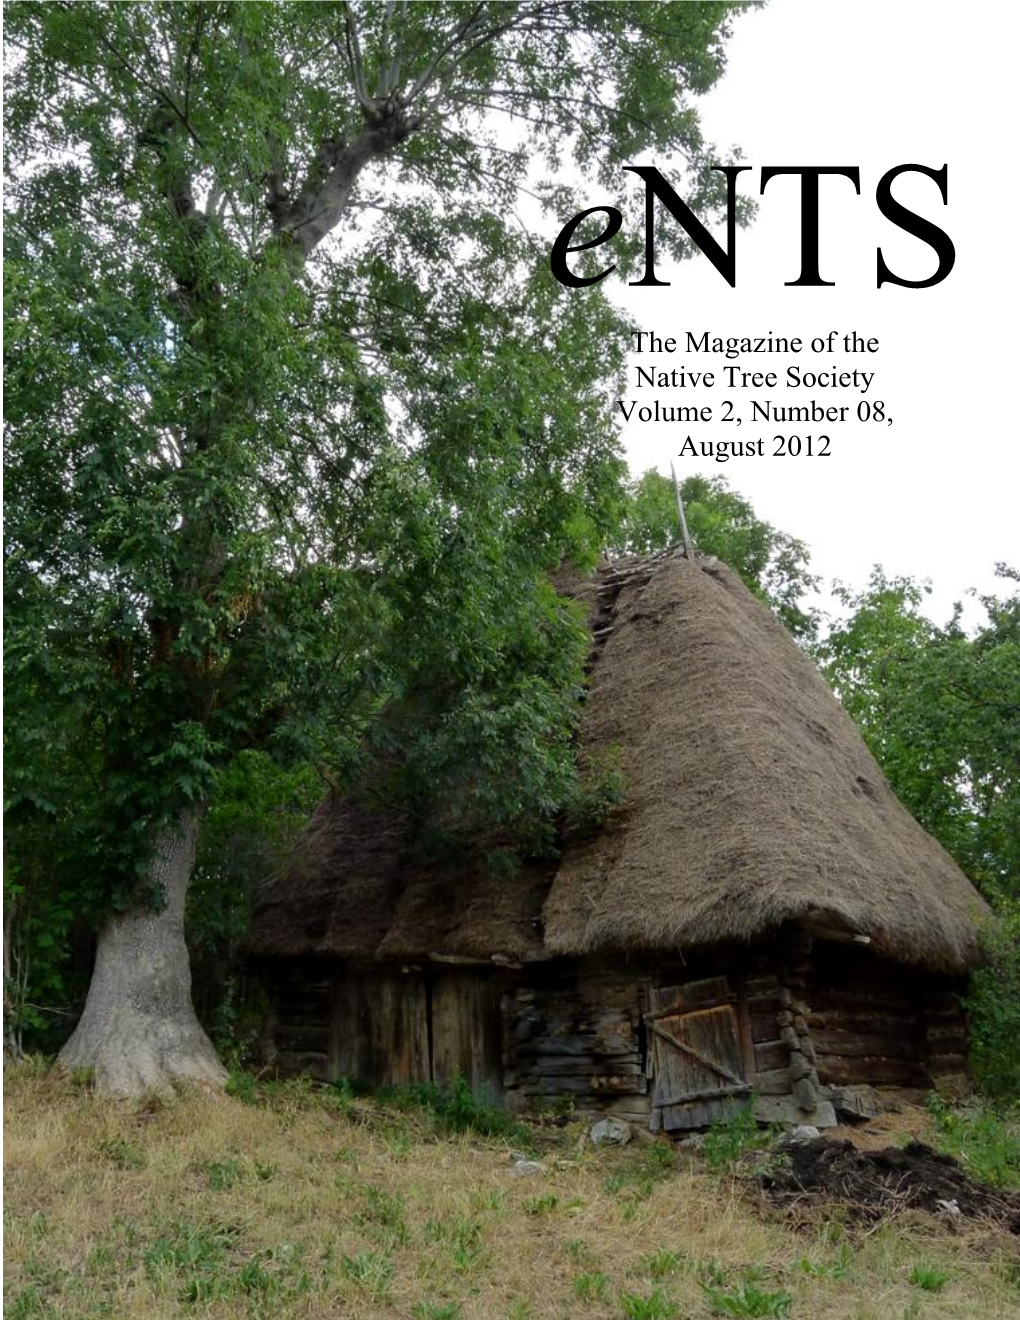 The Magazine of the Native Tree Society Volume 2, Number 08, August 2012